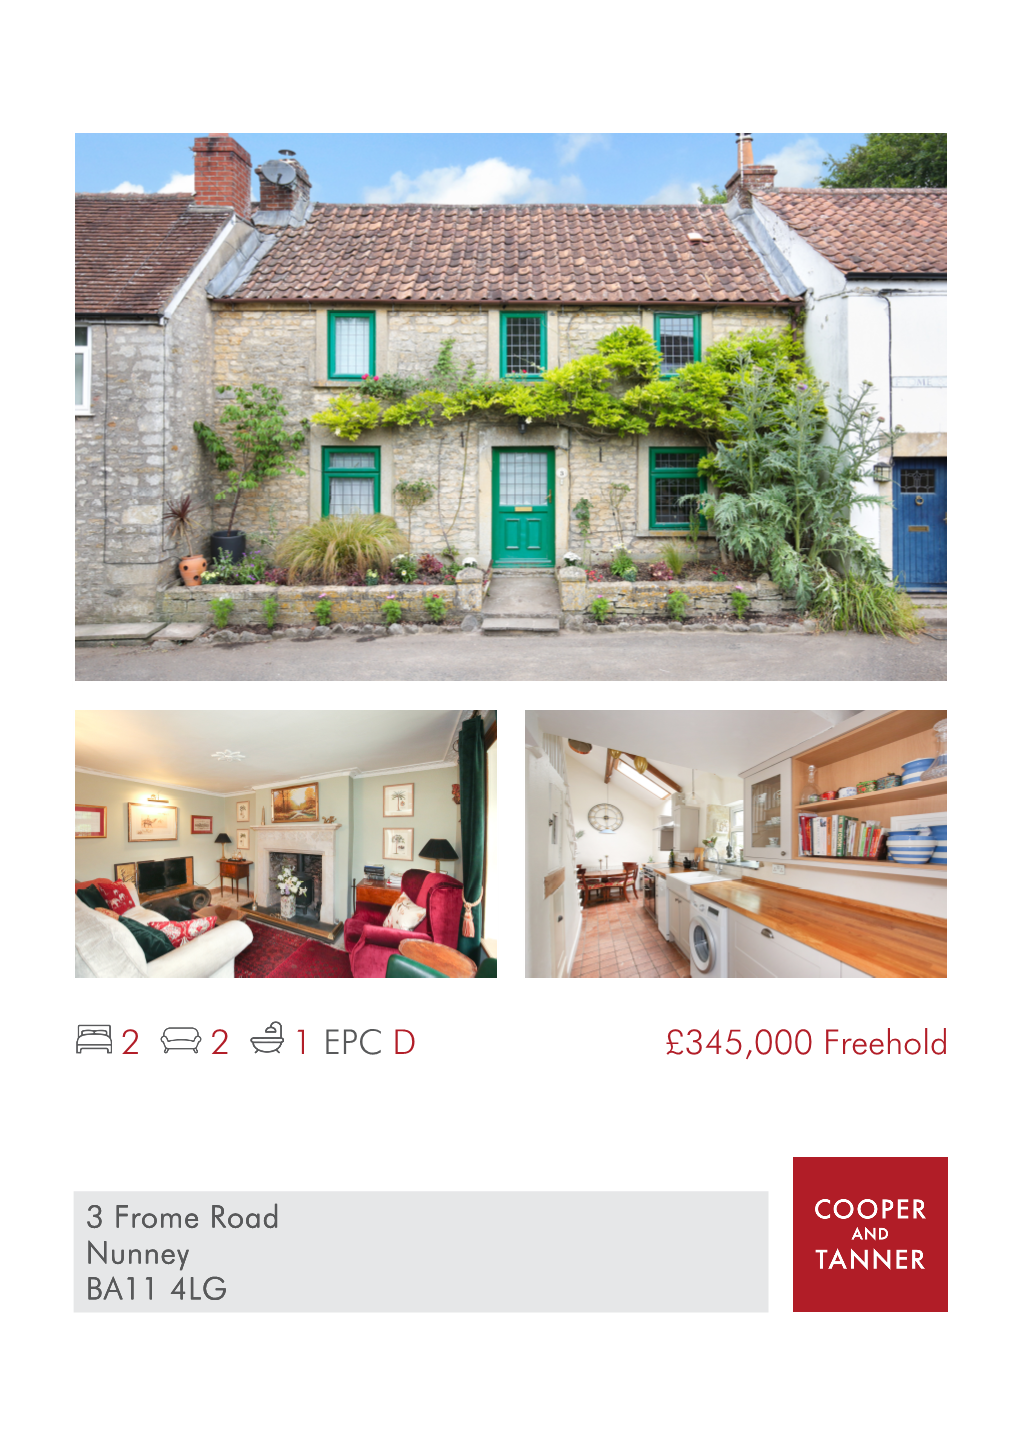 2 2 1 EPC D £345,000 Freehold